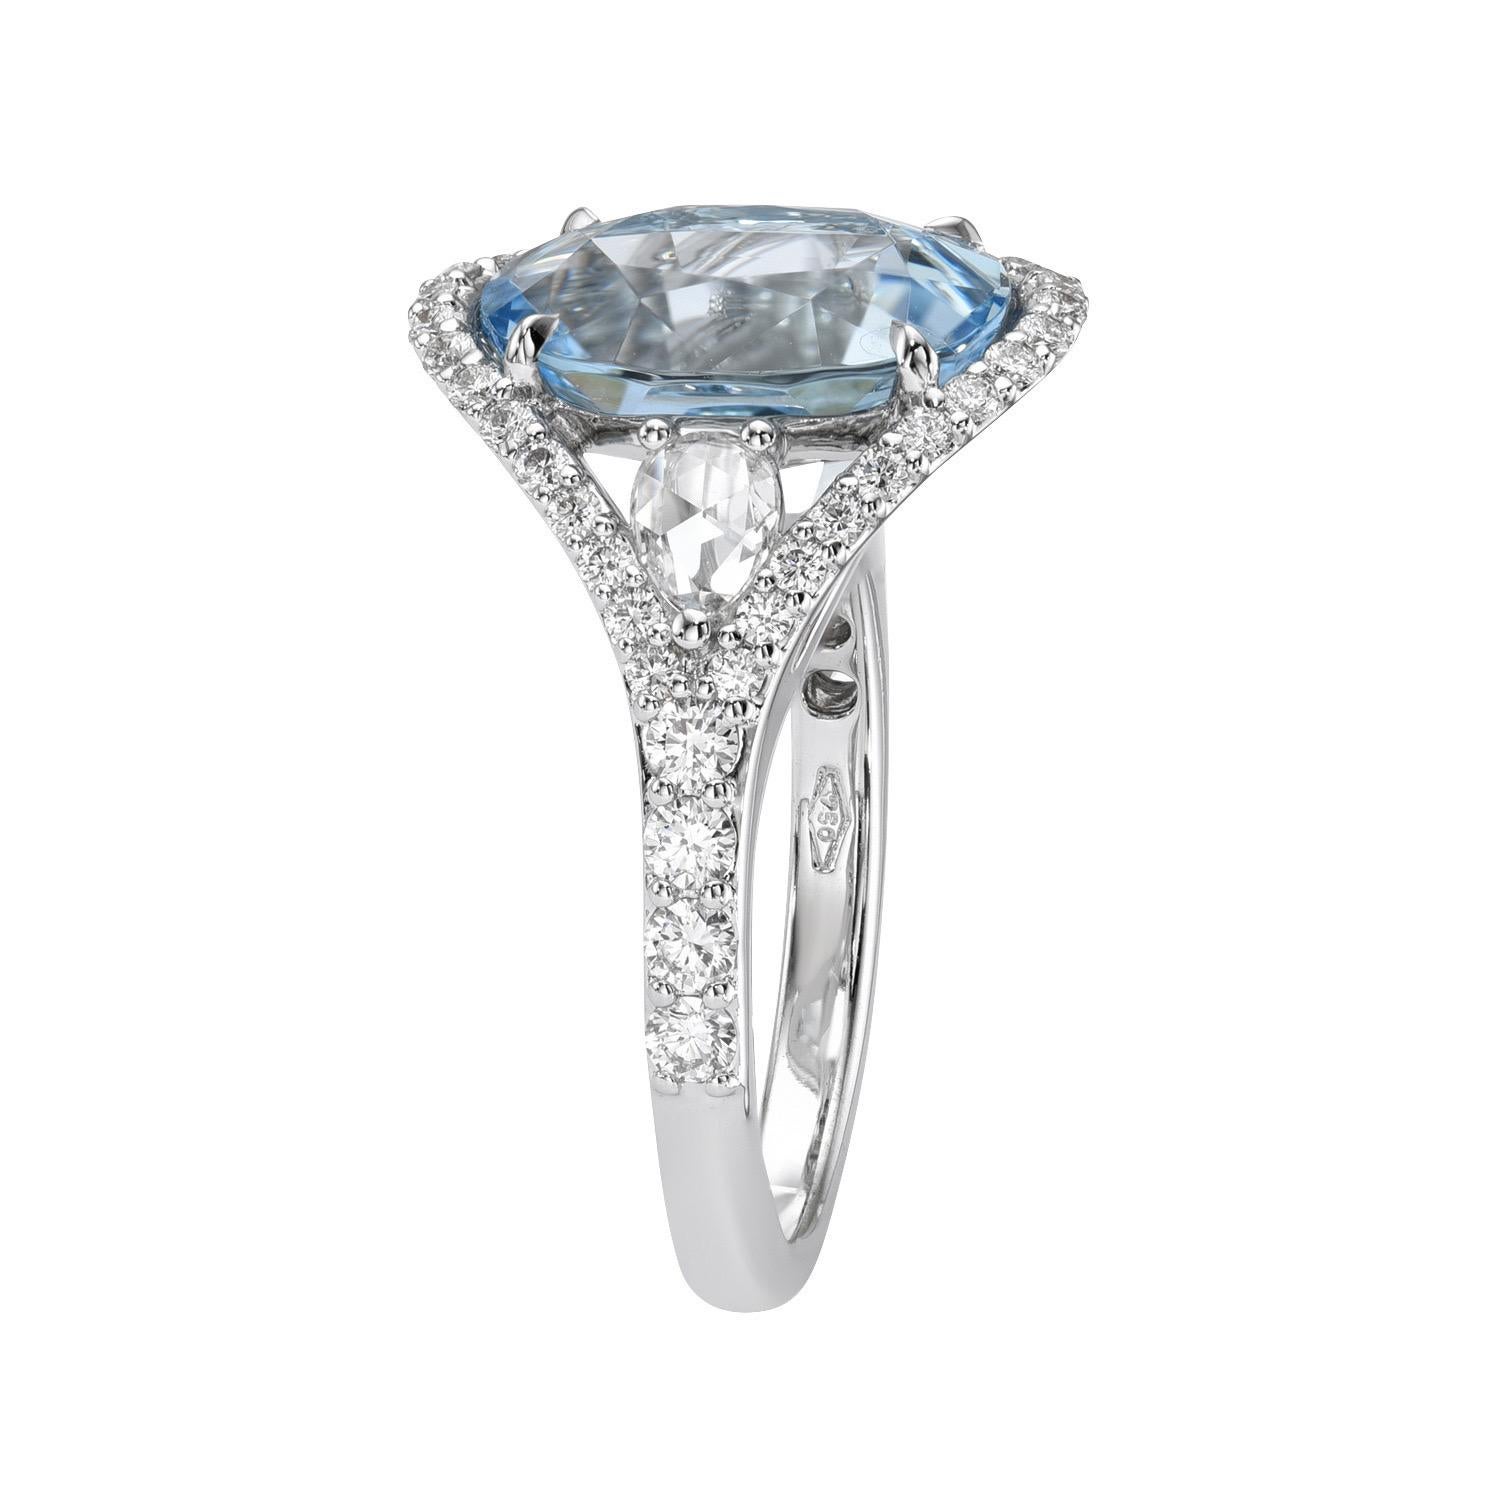 Graceful 4.26 carat Aquamarine oval, 18K white gold ring, decorated with a pair of 0.30 carat Rose Cut pear shape collection diamonds, and a total of 0.61 carat collection round brilliant diamonds.
Ring size 6.5. Resizing is complementary upon